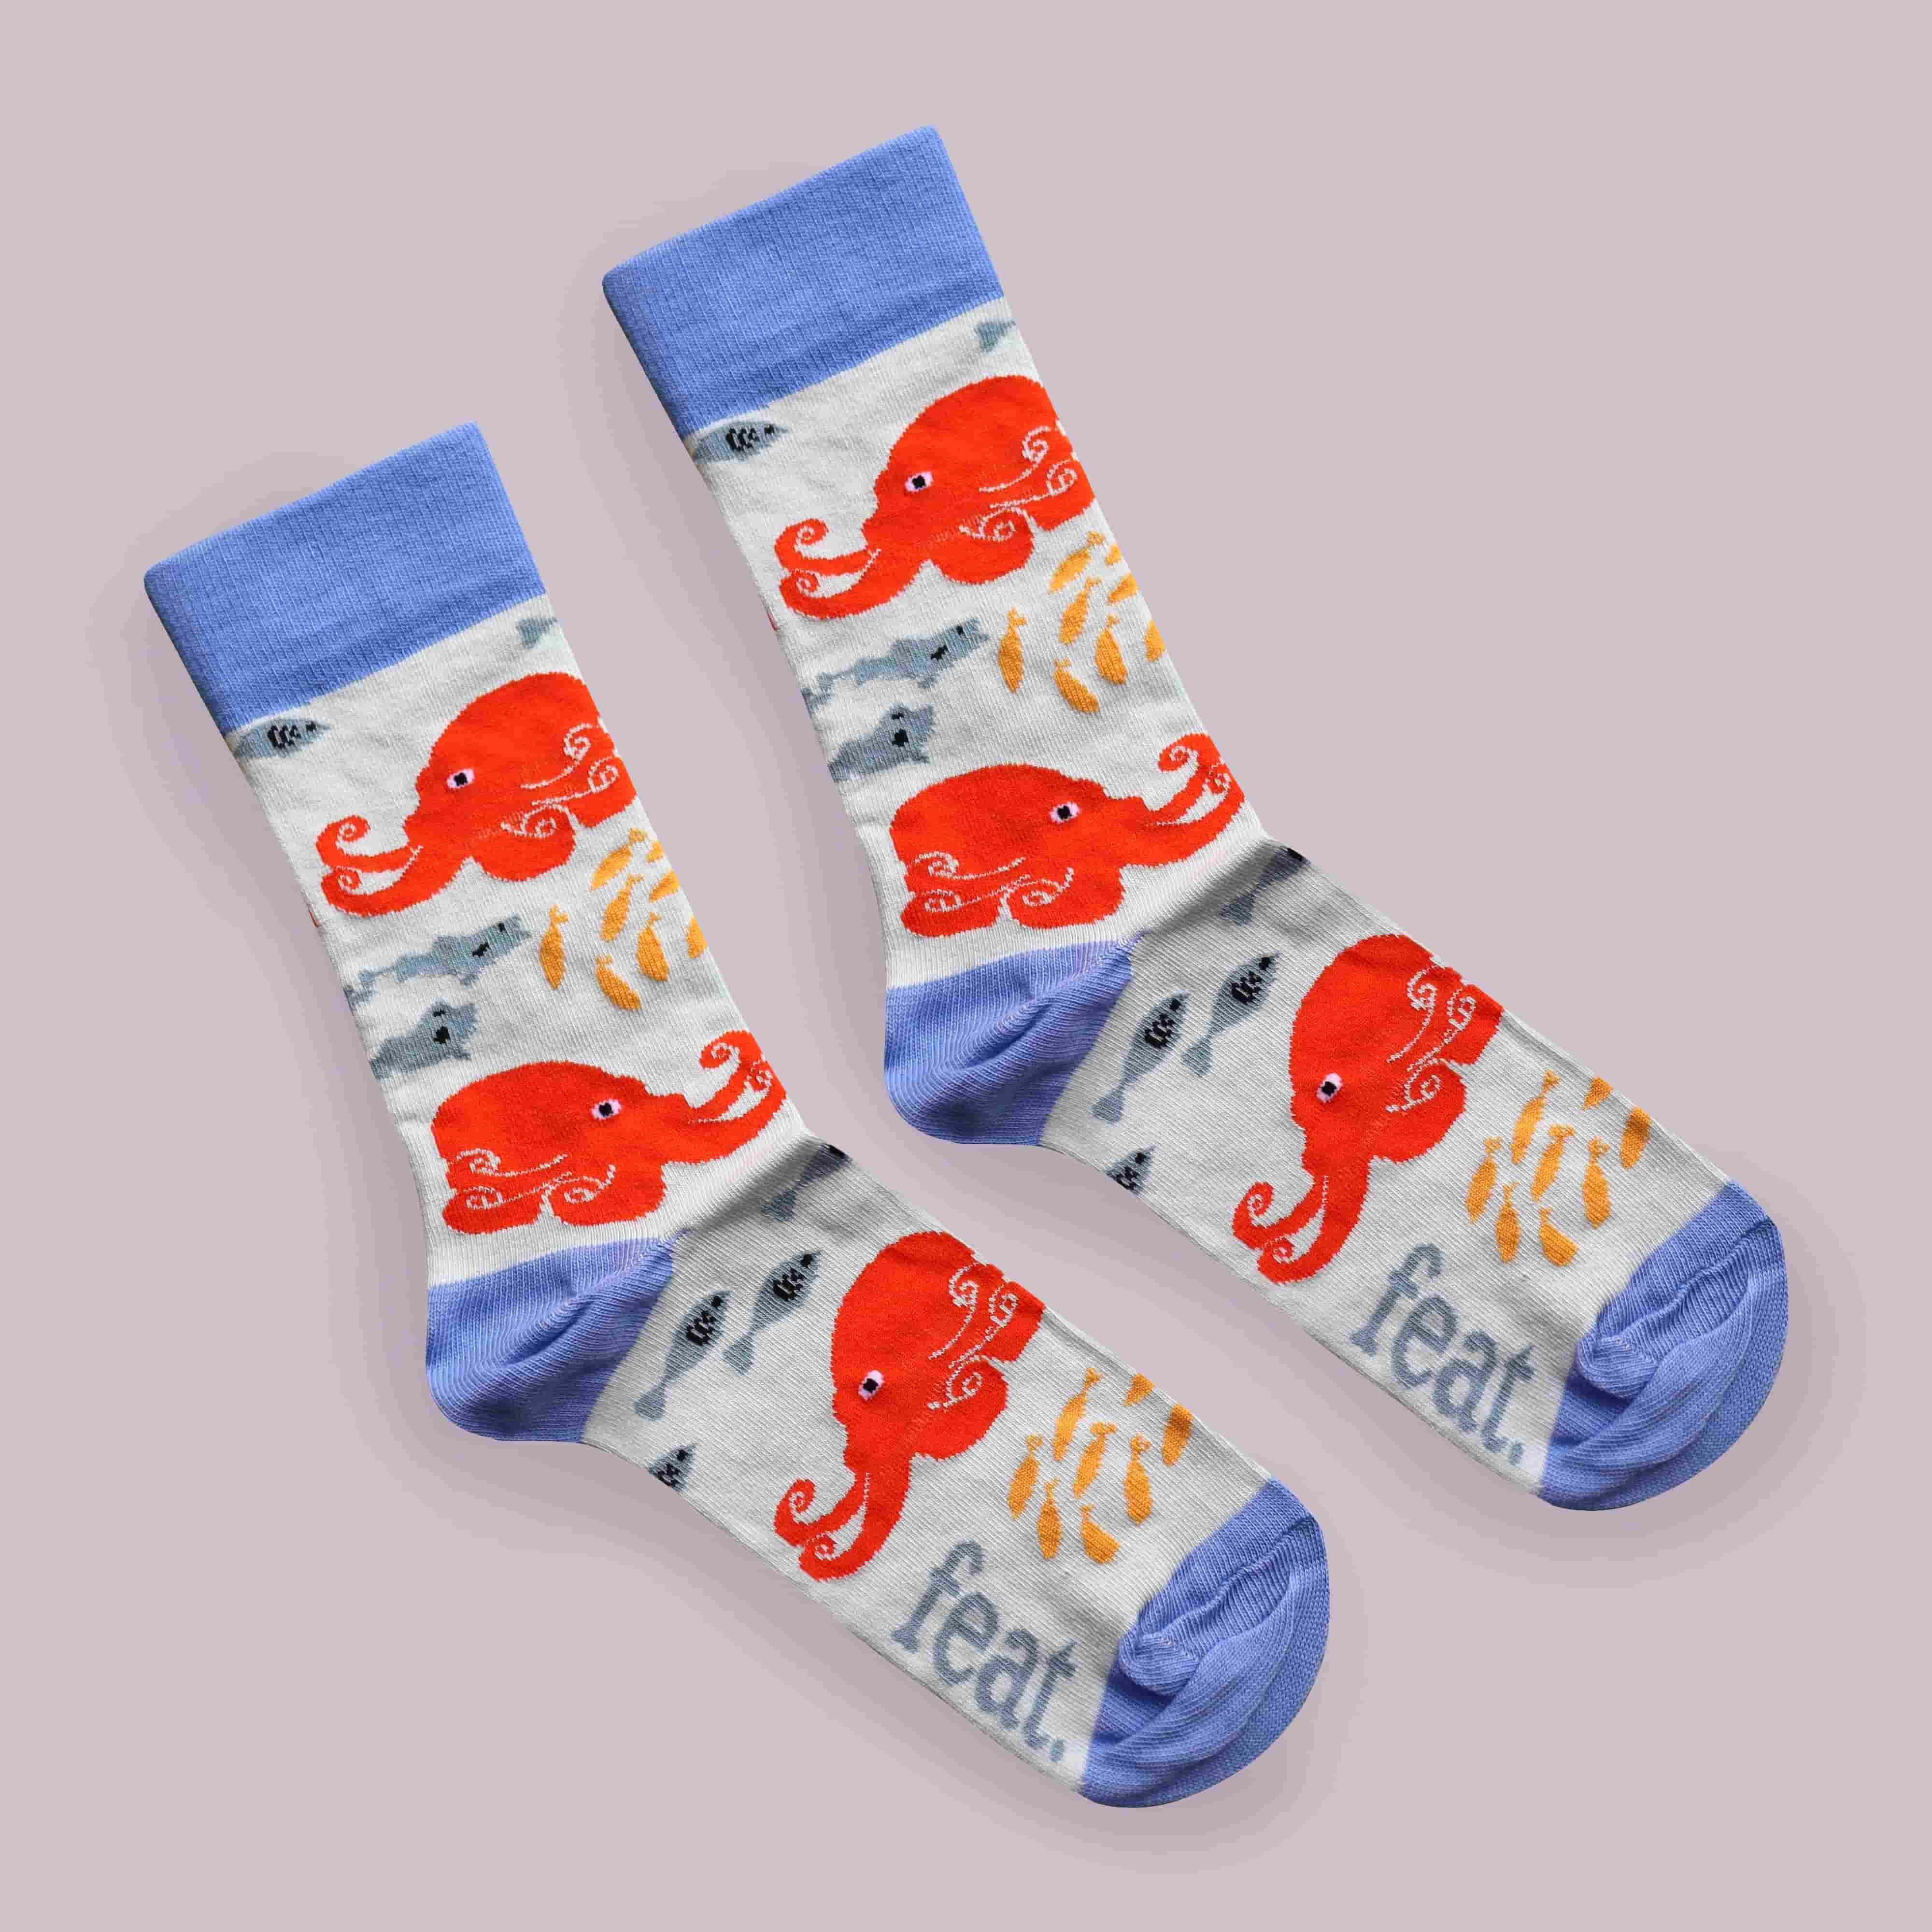 Blue and orange octopus socks made in South Africa